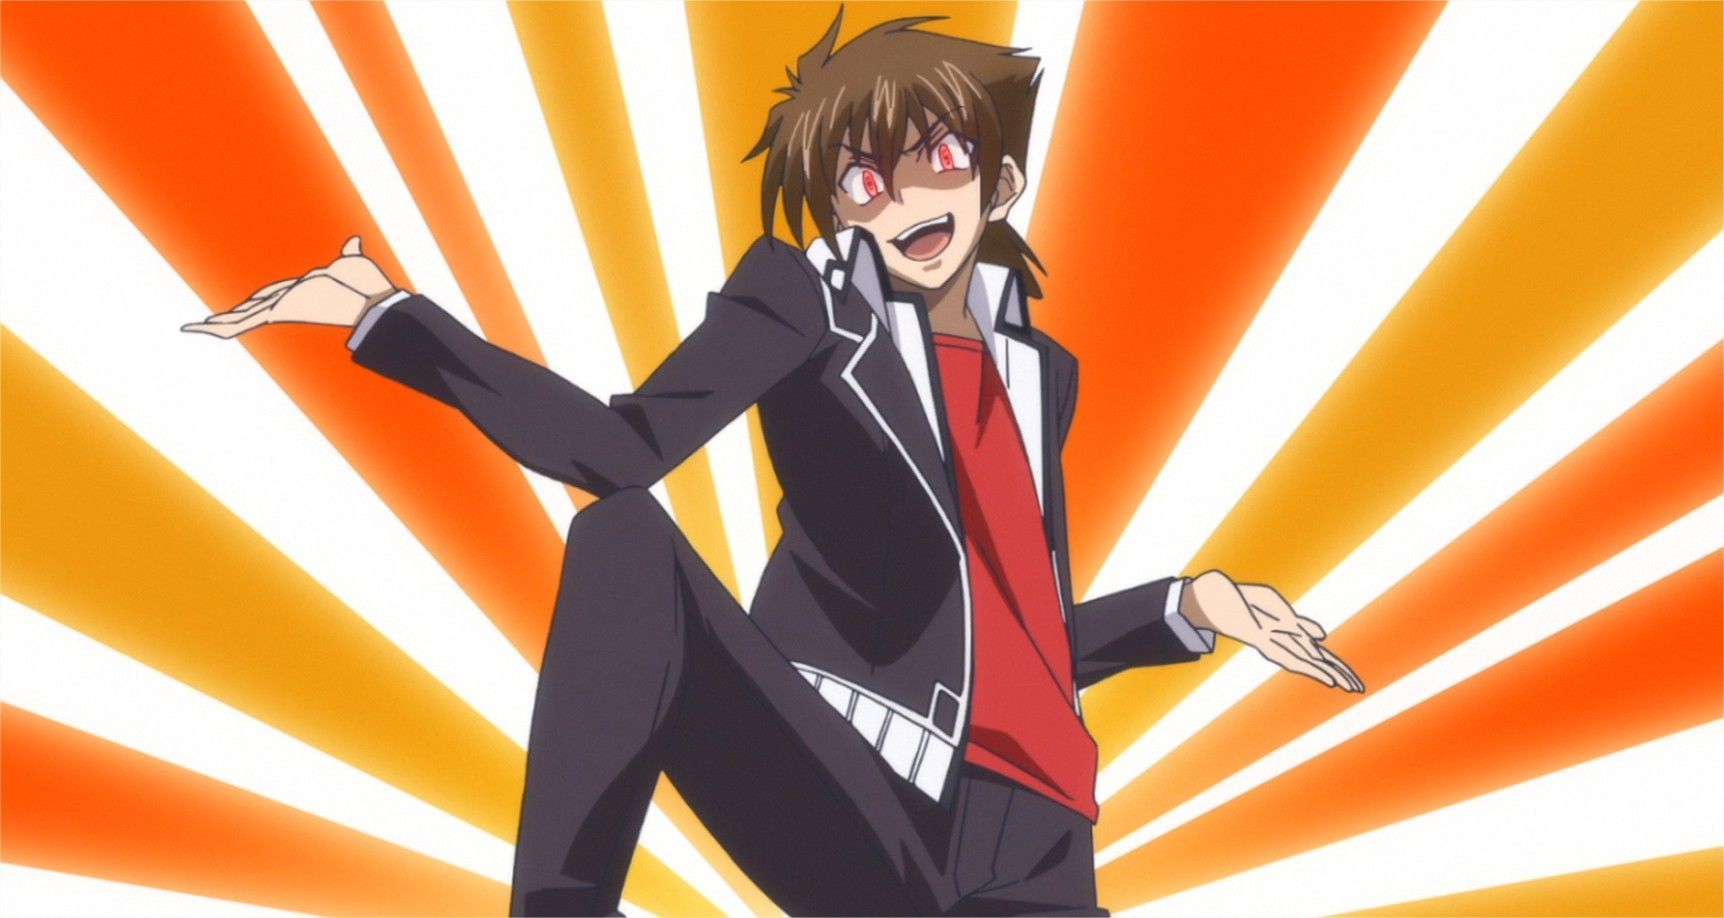 Image for Issei Hyoudou High School DxD Wallpapers.